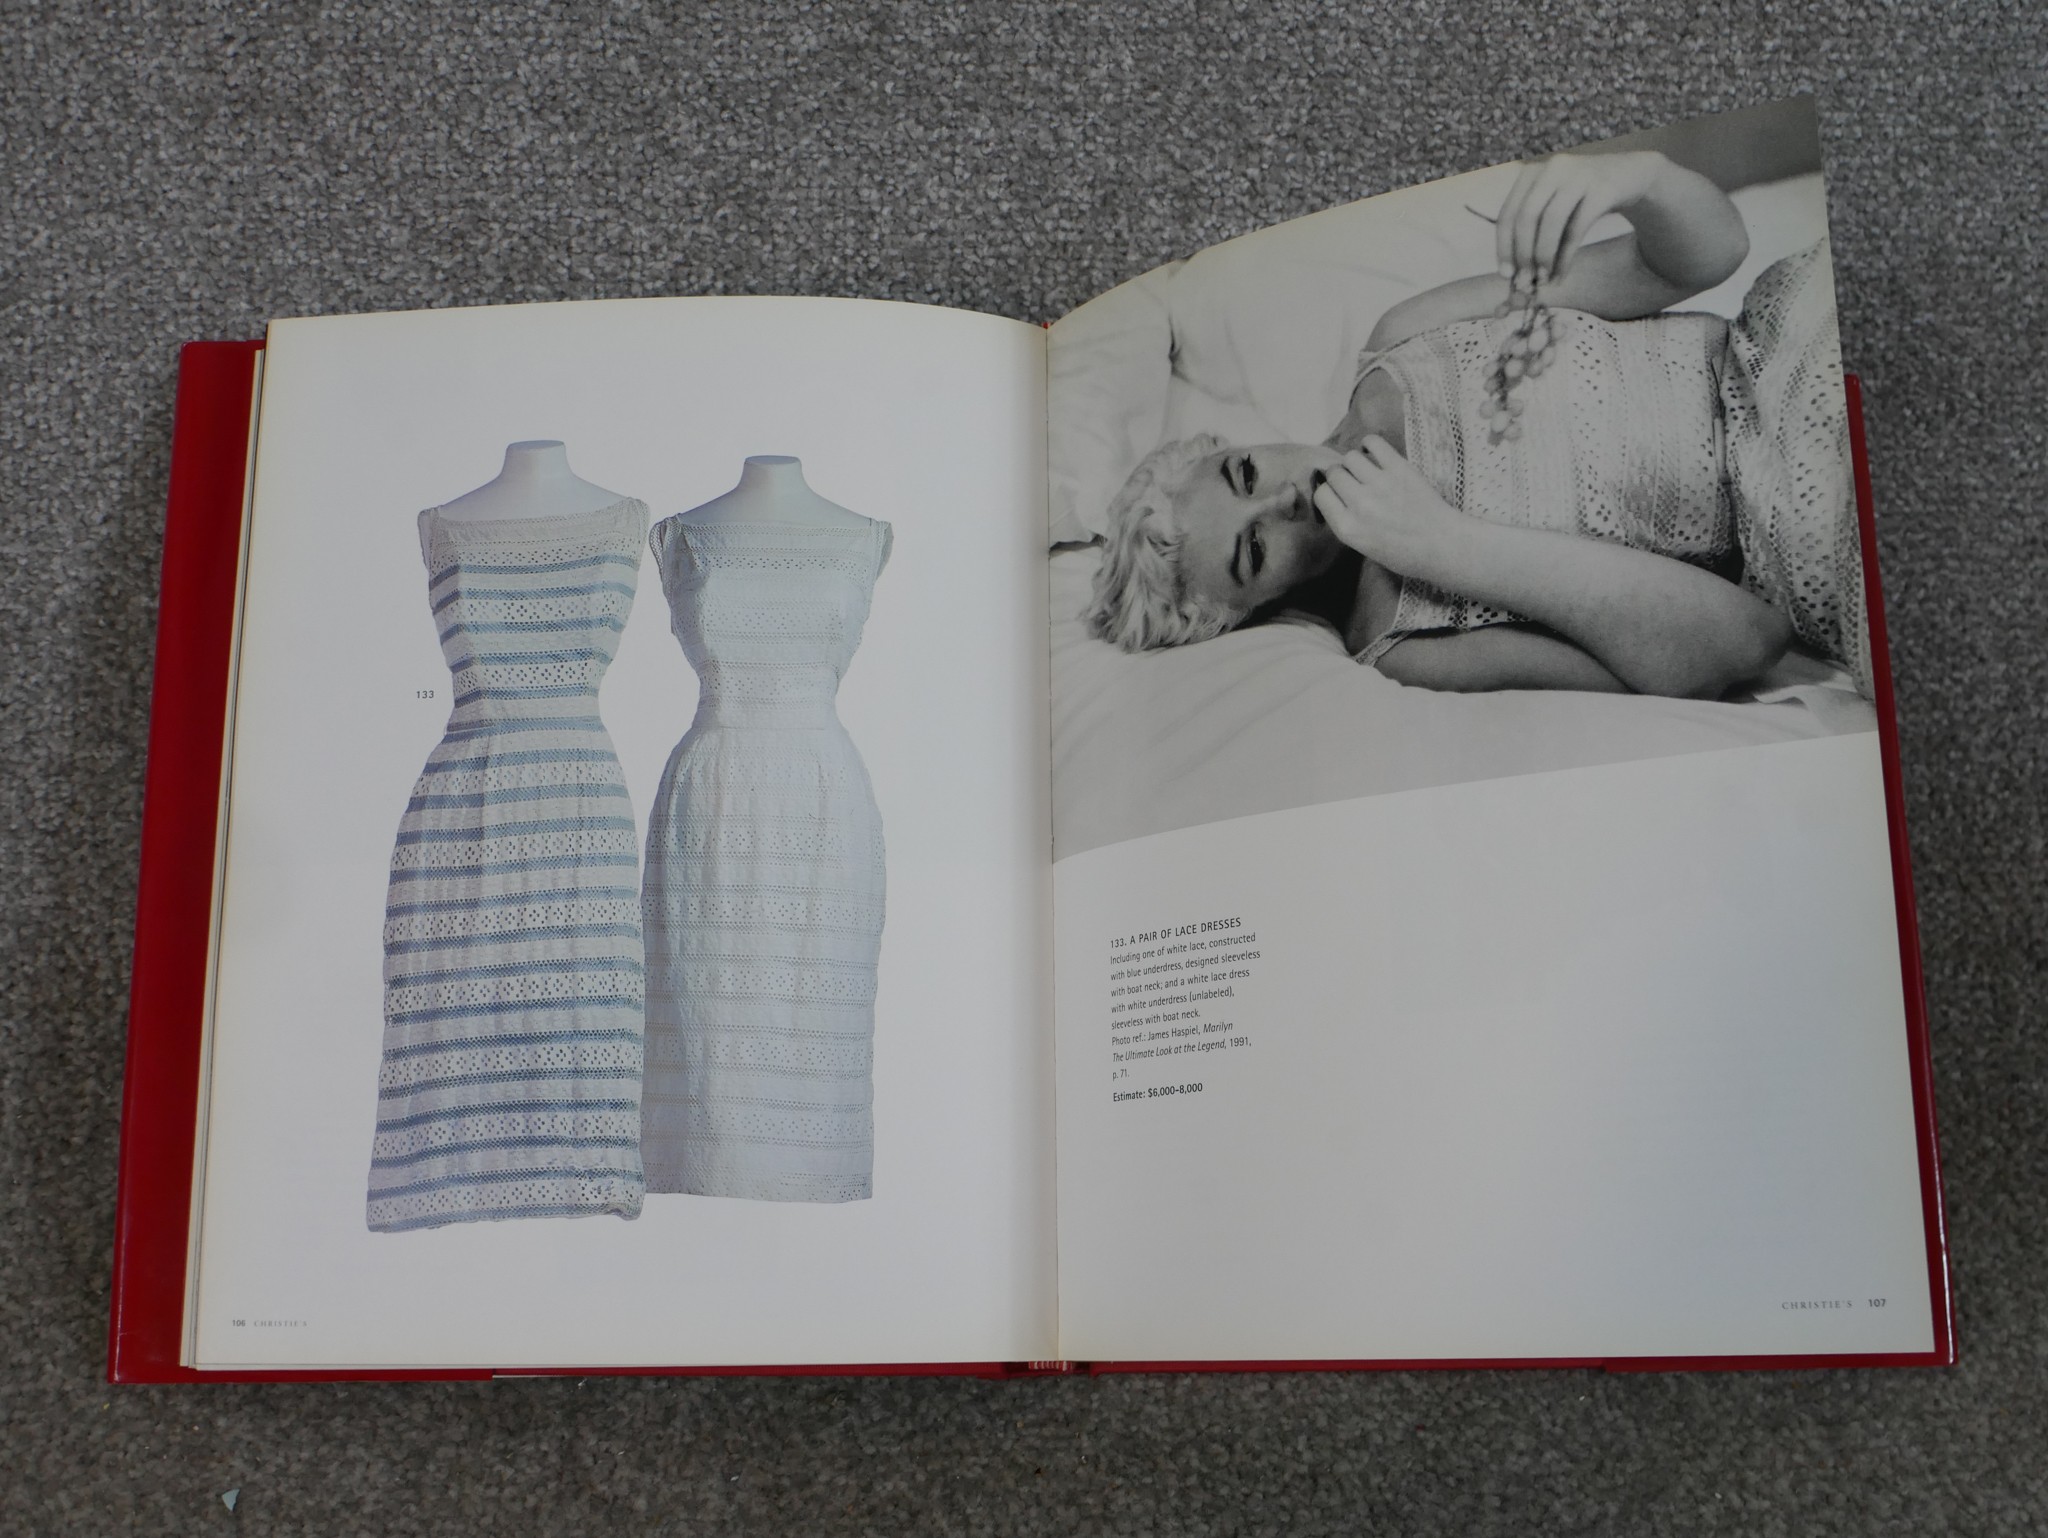 The Marilyn Monroe Collection Catalogue: The Personal Property of Marilyn Monroe held at Christies - Image 3 of 7